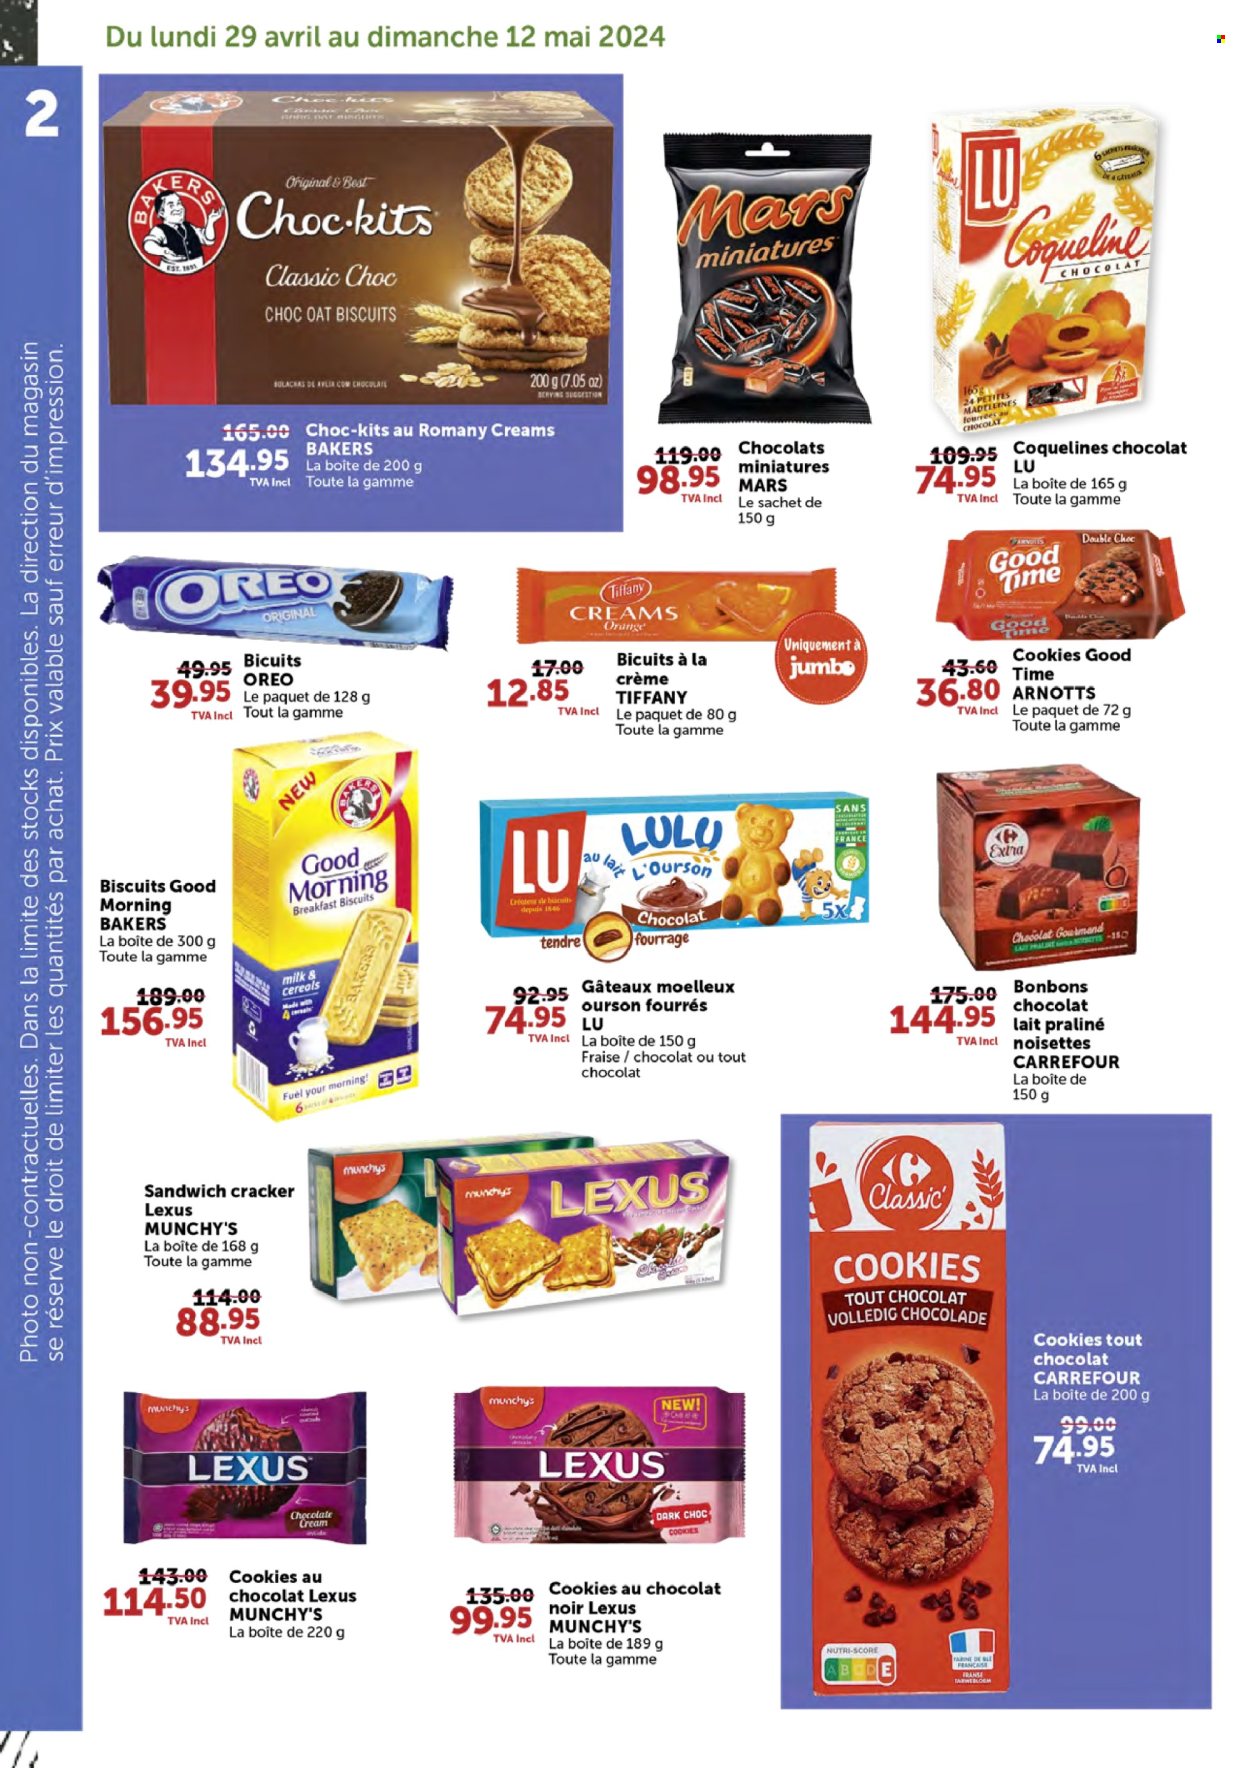 thumbnail - Jumbo Catalogue - 29.04.2024 - 12.05.2024 - Sales products - sweet bread, Oreo, cookies, Mars, crackers, biscuit, sweets, cereals, Bakers. Page 2.